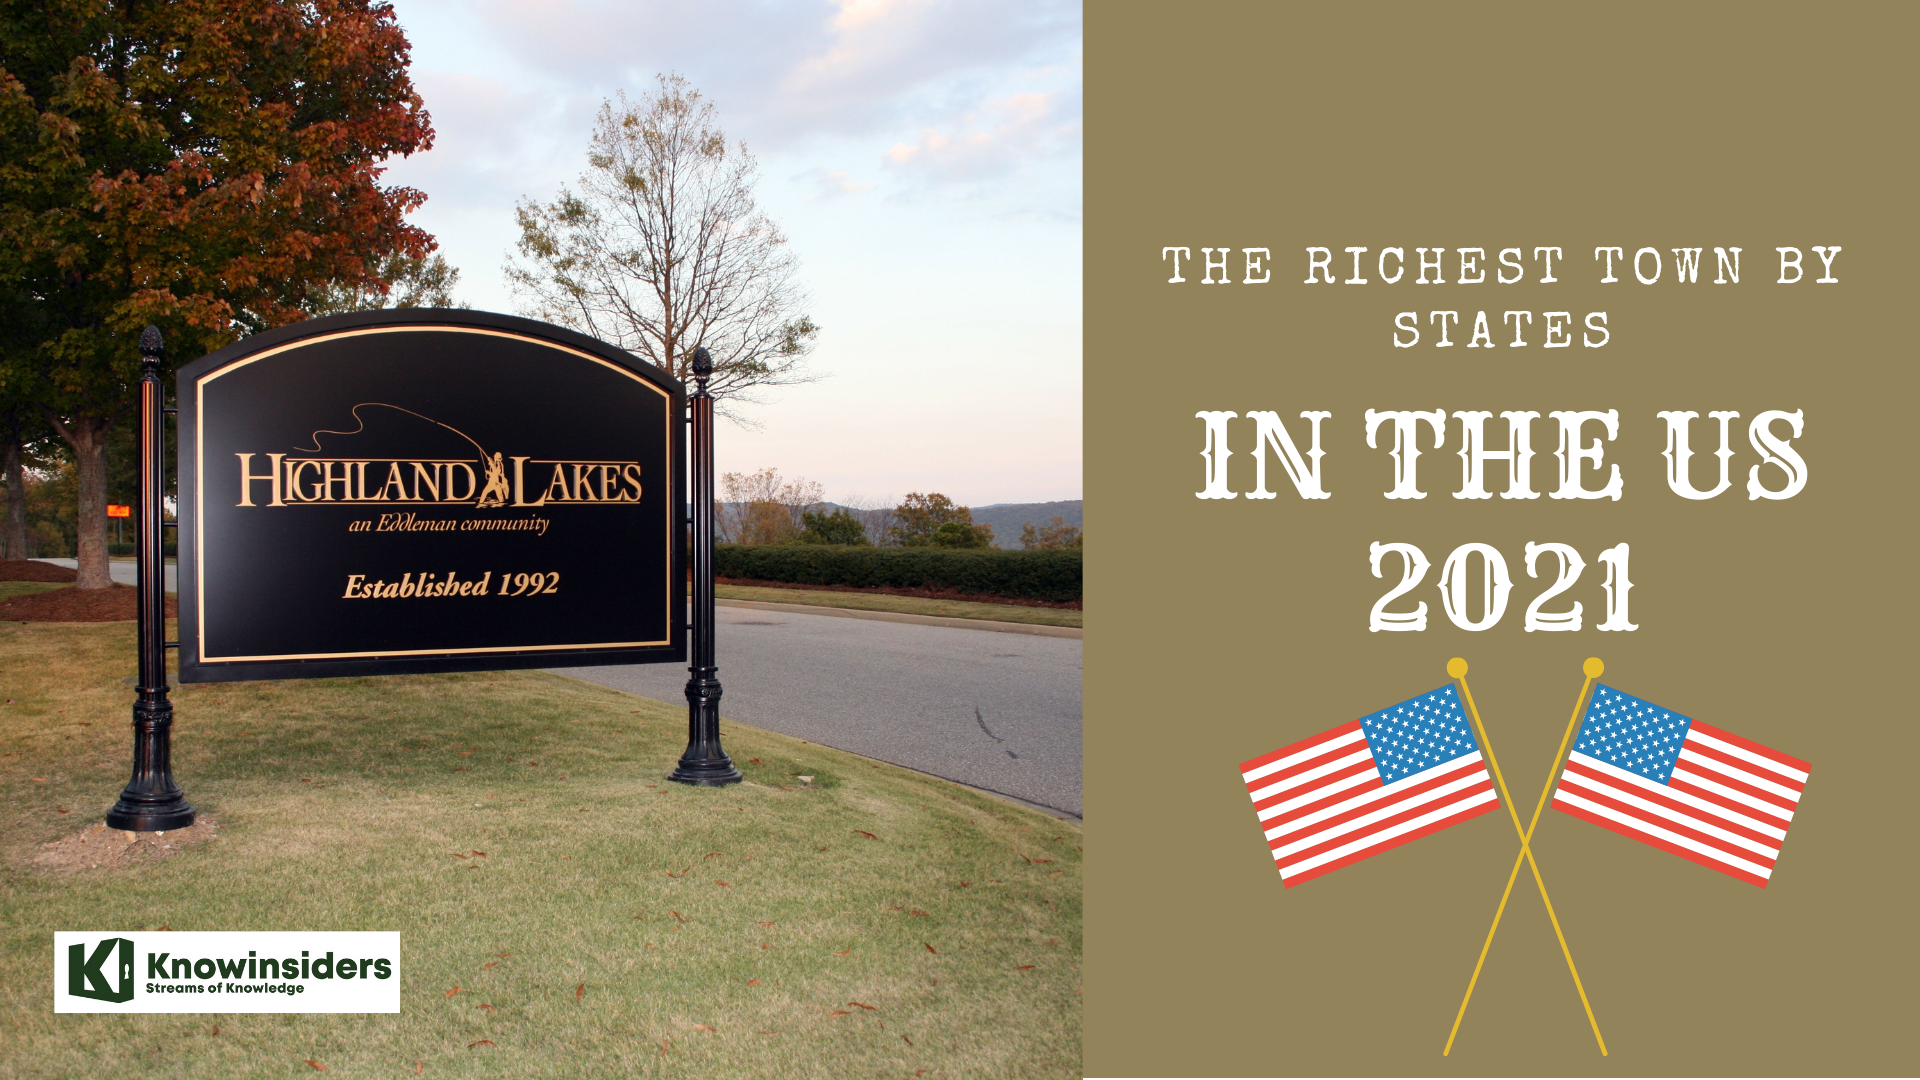 The Richest Town by states in the US 2021 